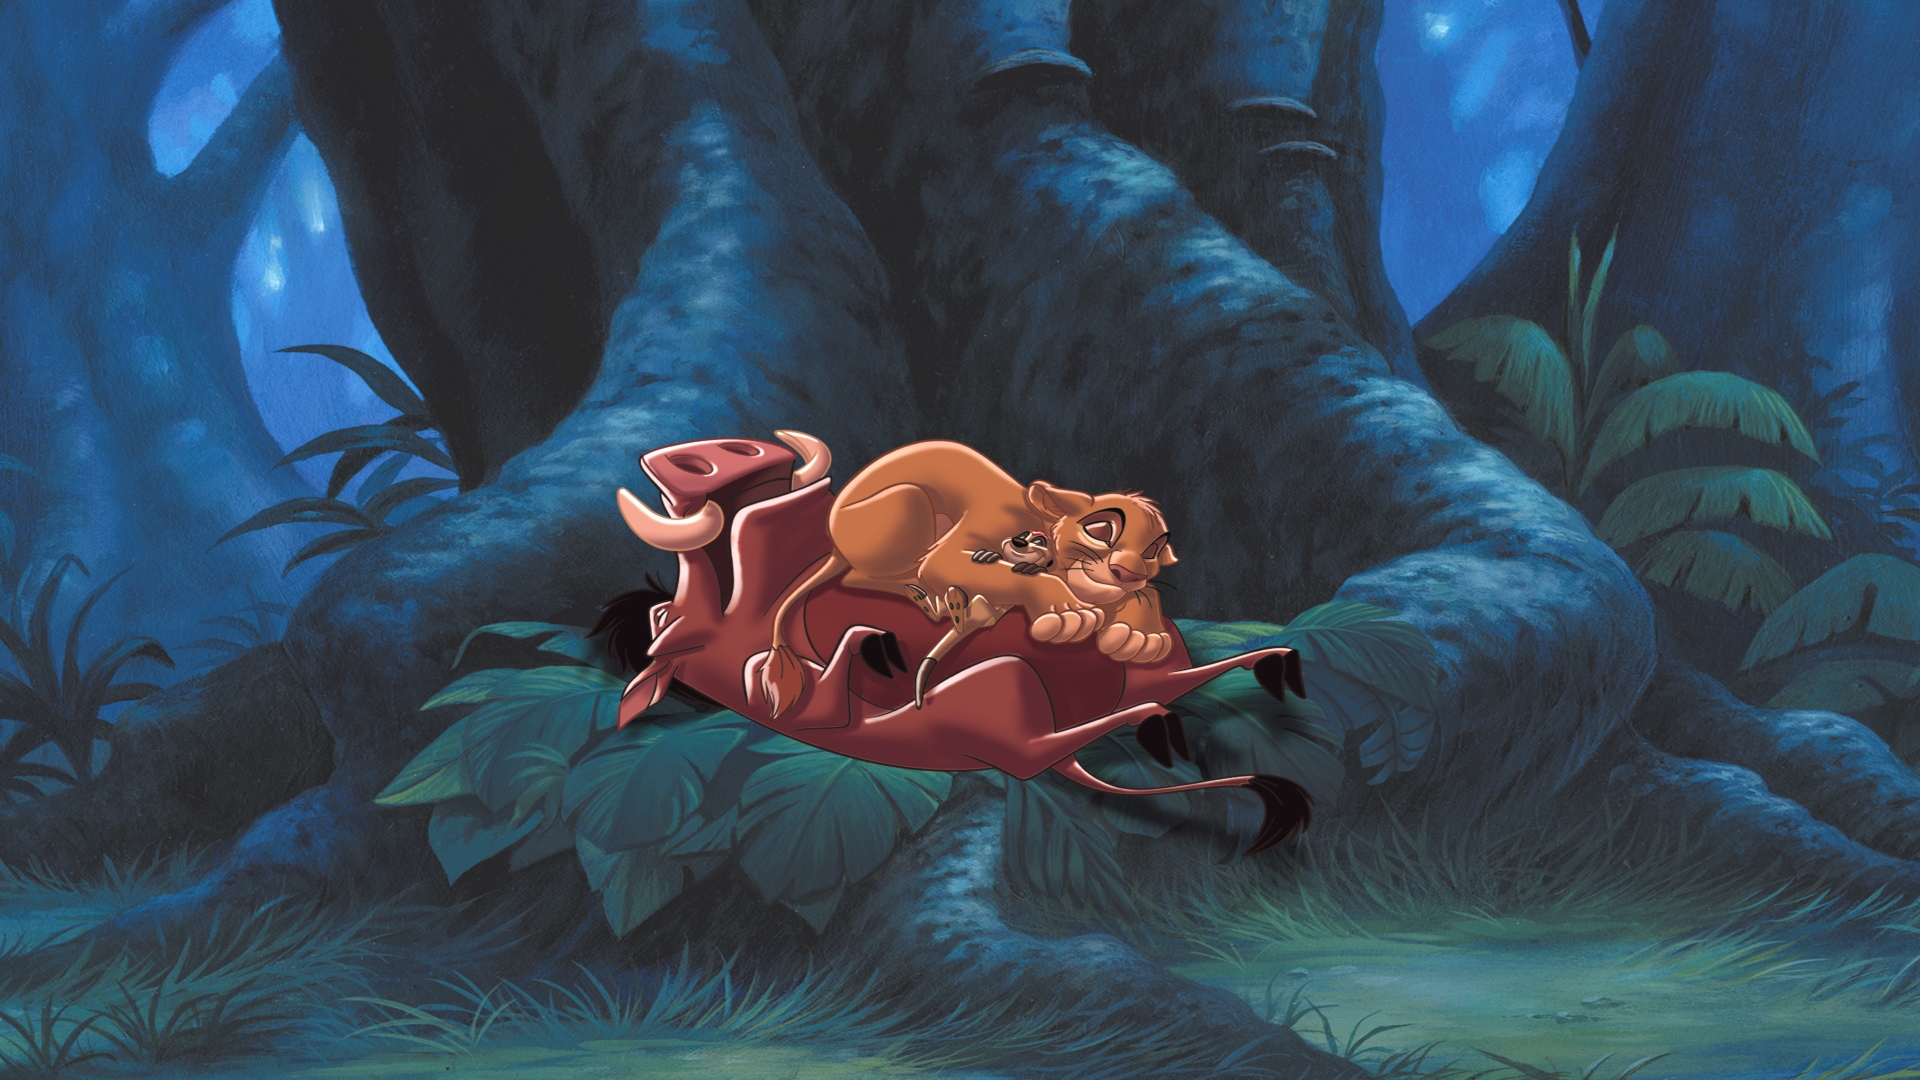 Movie The Lion King 1 1 2 1920x1080